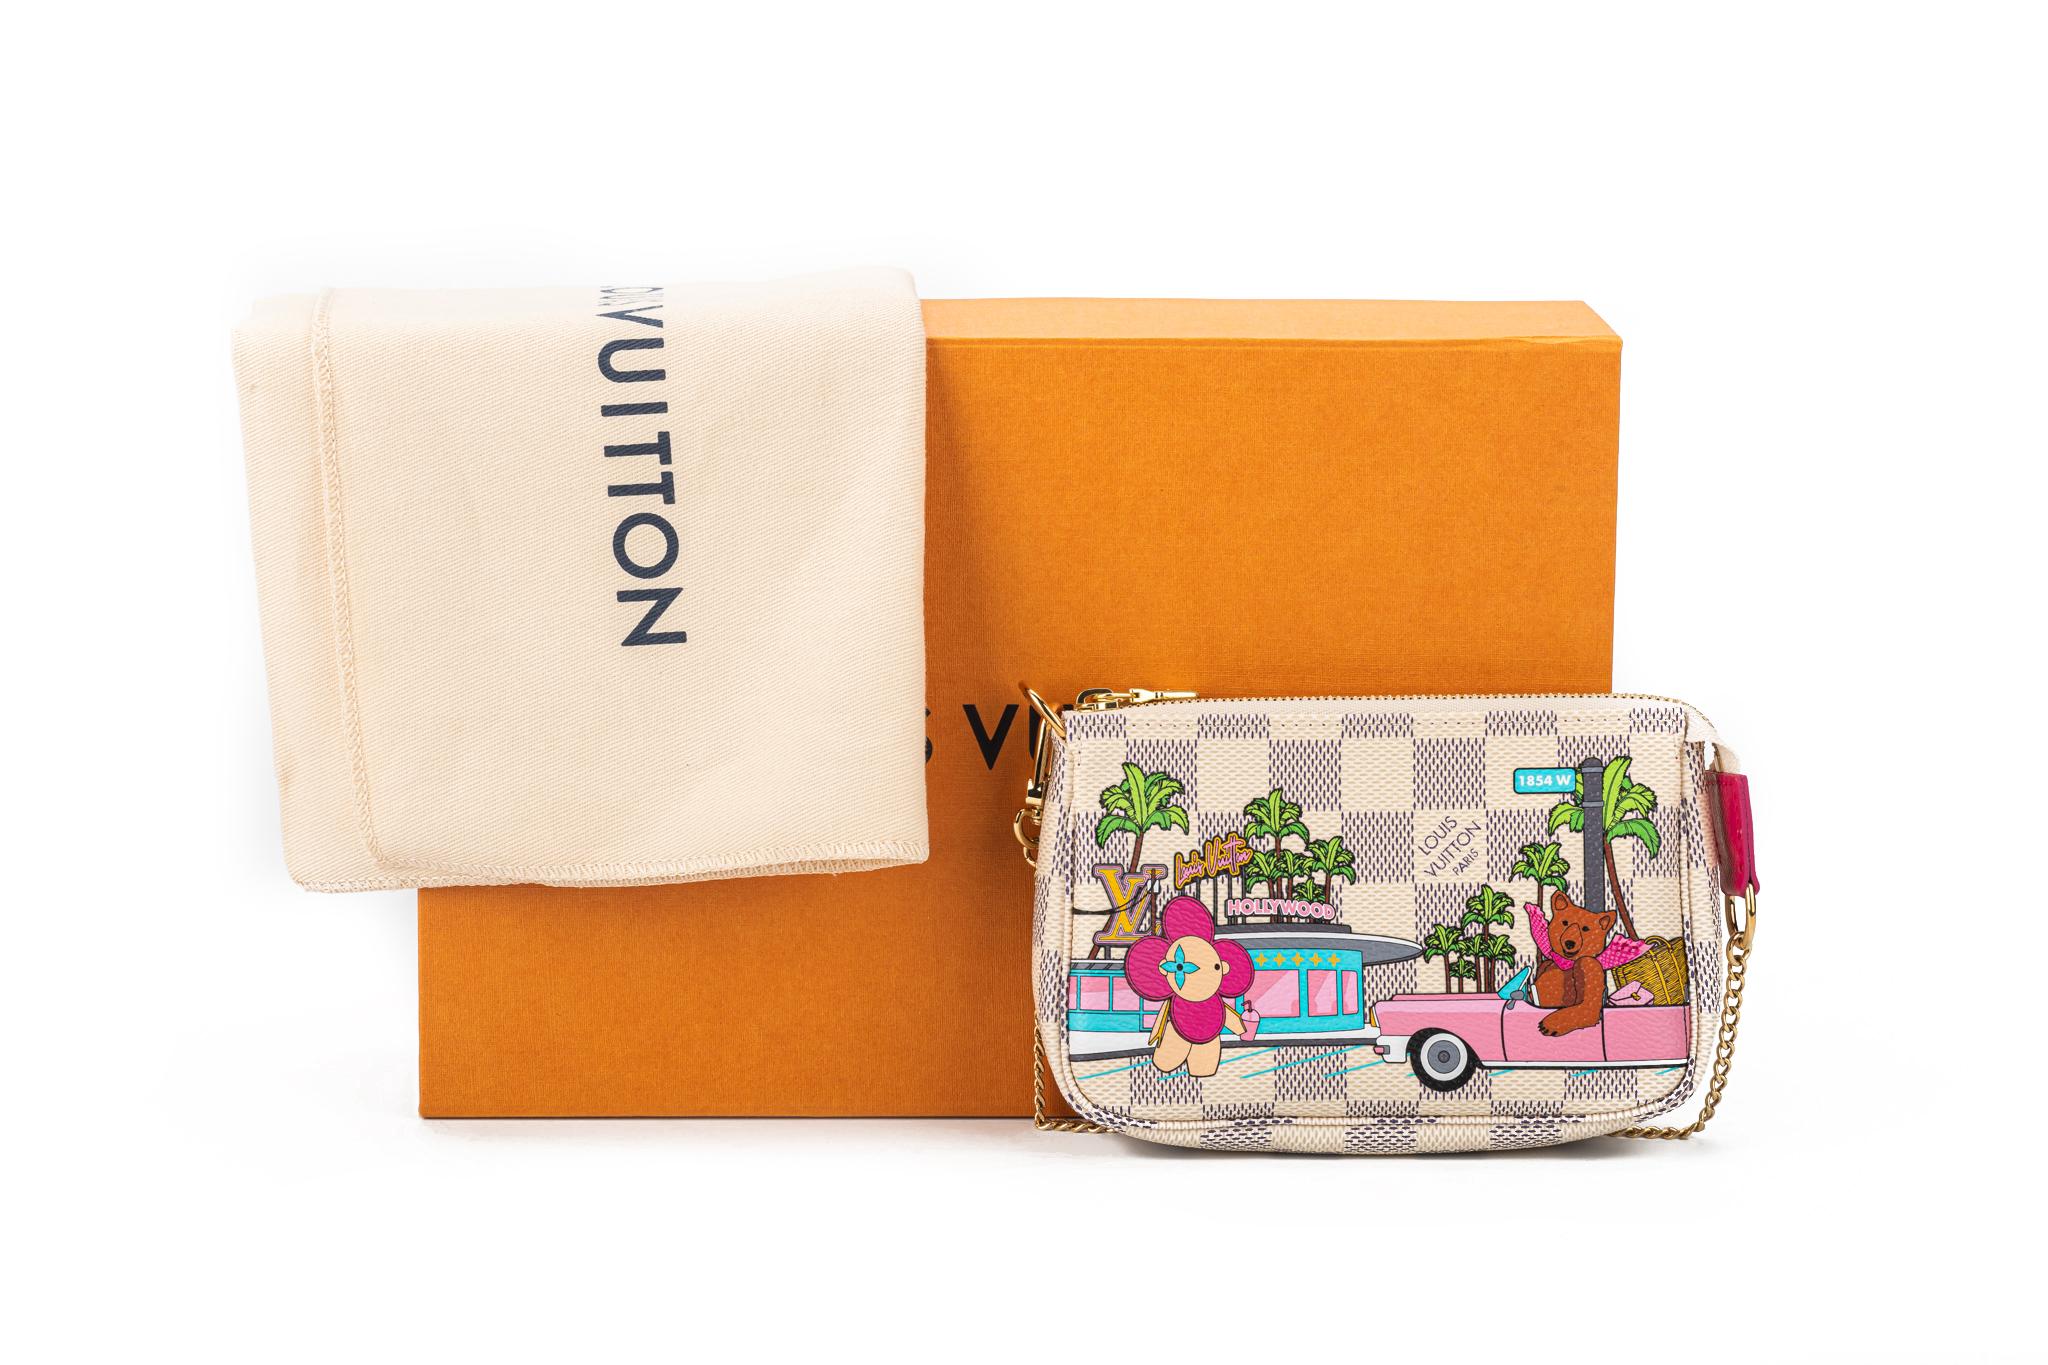 Louis Vuitton Mini Pochette Accessoires In White Crafted from Damier Azur canvas. The Mini Pochette features a limited edition print of the house mascot Vivienne visiting Hollywood. In front of the LV Diner, she watches as a California bear arrives